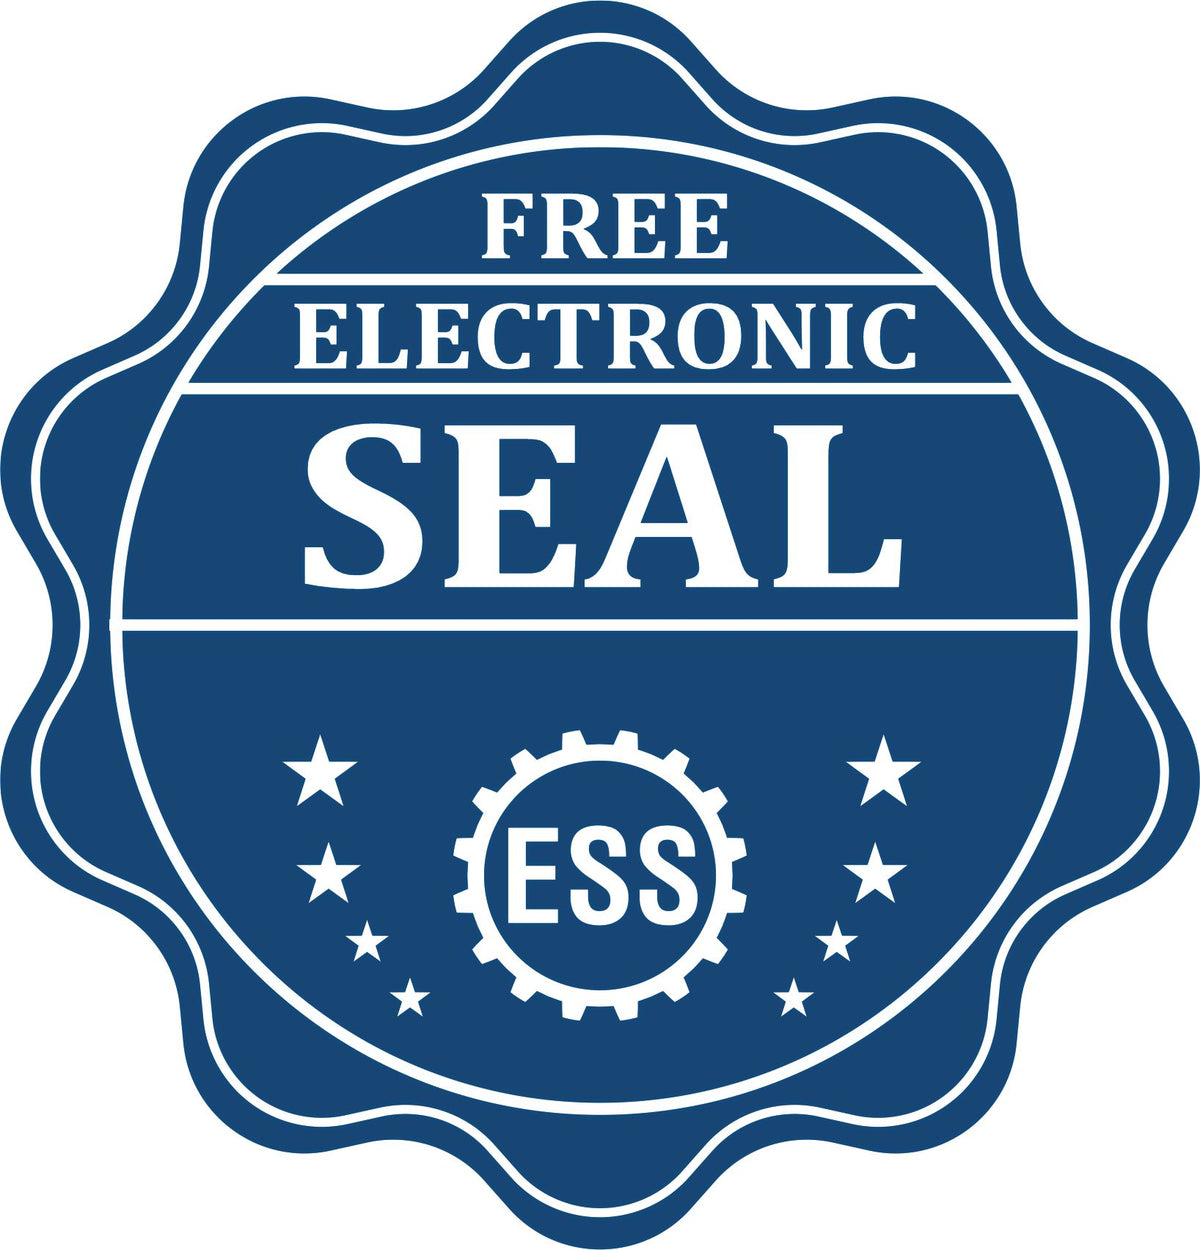 A badge showing a free electronic seal for the Handheld Indiana Professional Geologist Embosser with stars and the ESS gear on the emblem.